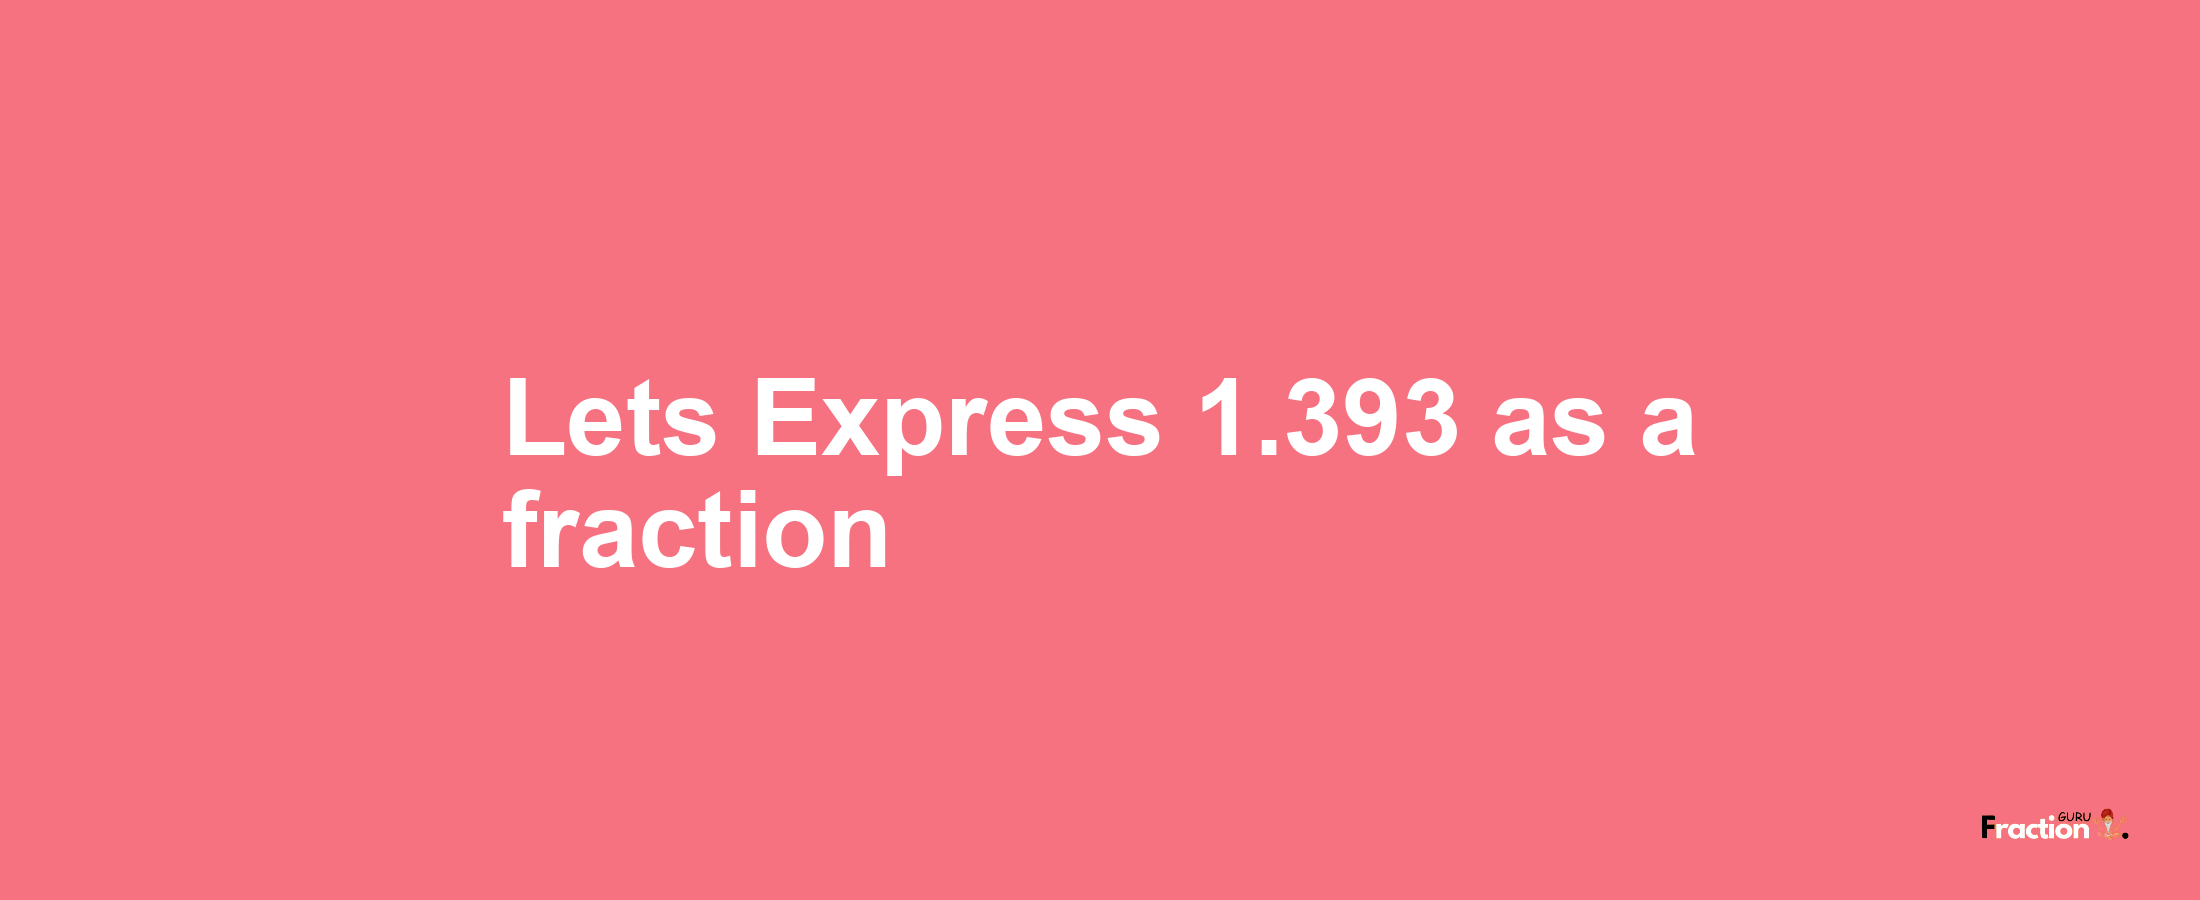 Lets Express 1.393 as afraction